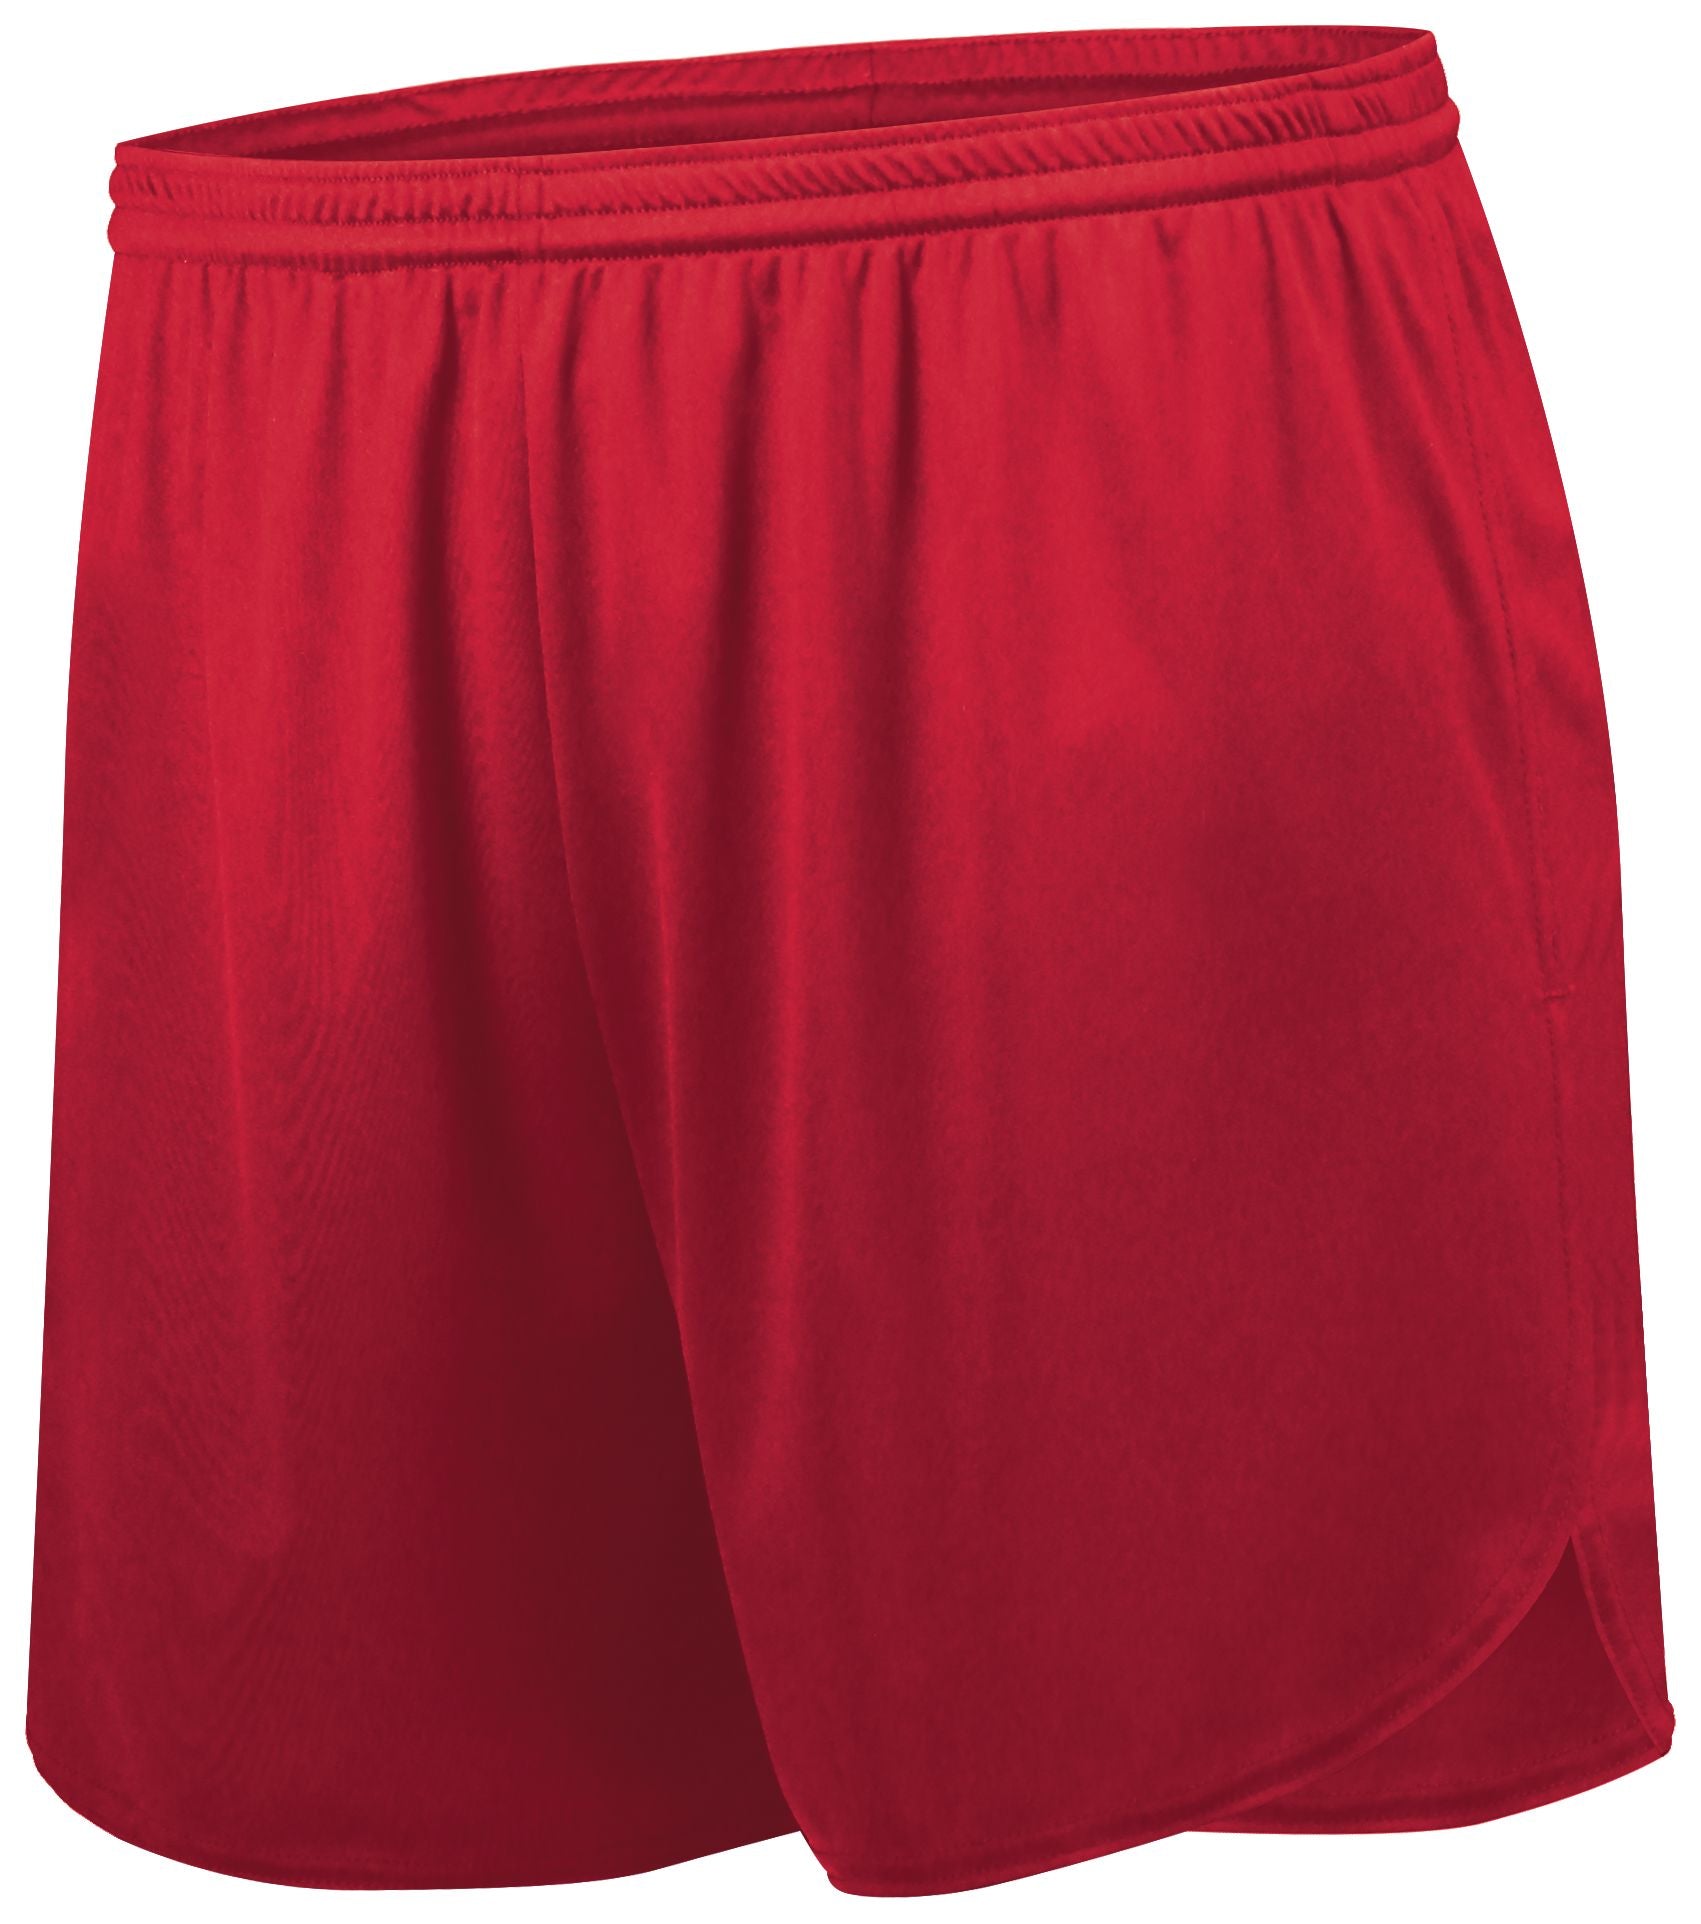 Holloway Pr Max Track Shorts in Scarlet  -Part of the Adult, Adult-Shorts, Track-Field, Holloway product lines at KanaleyCreations.com